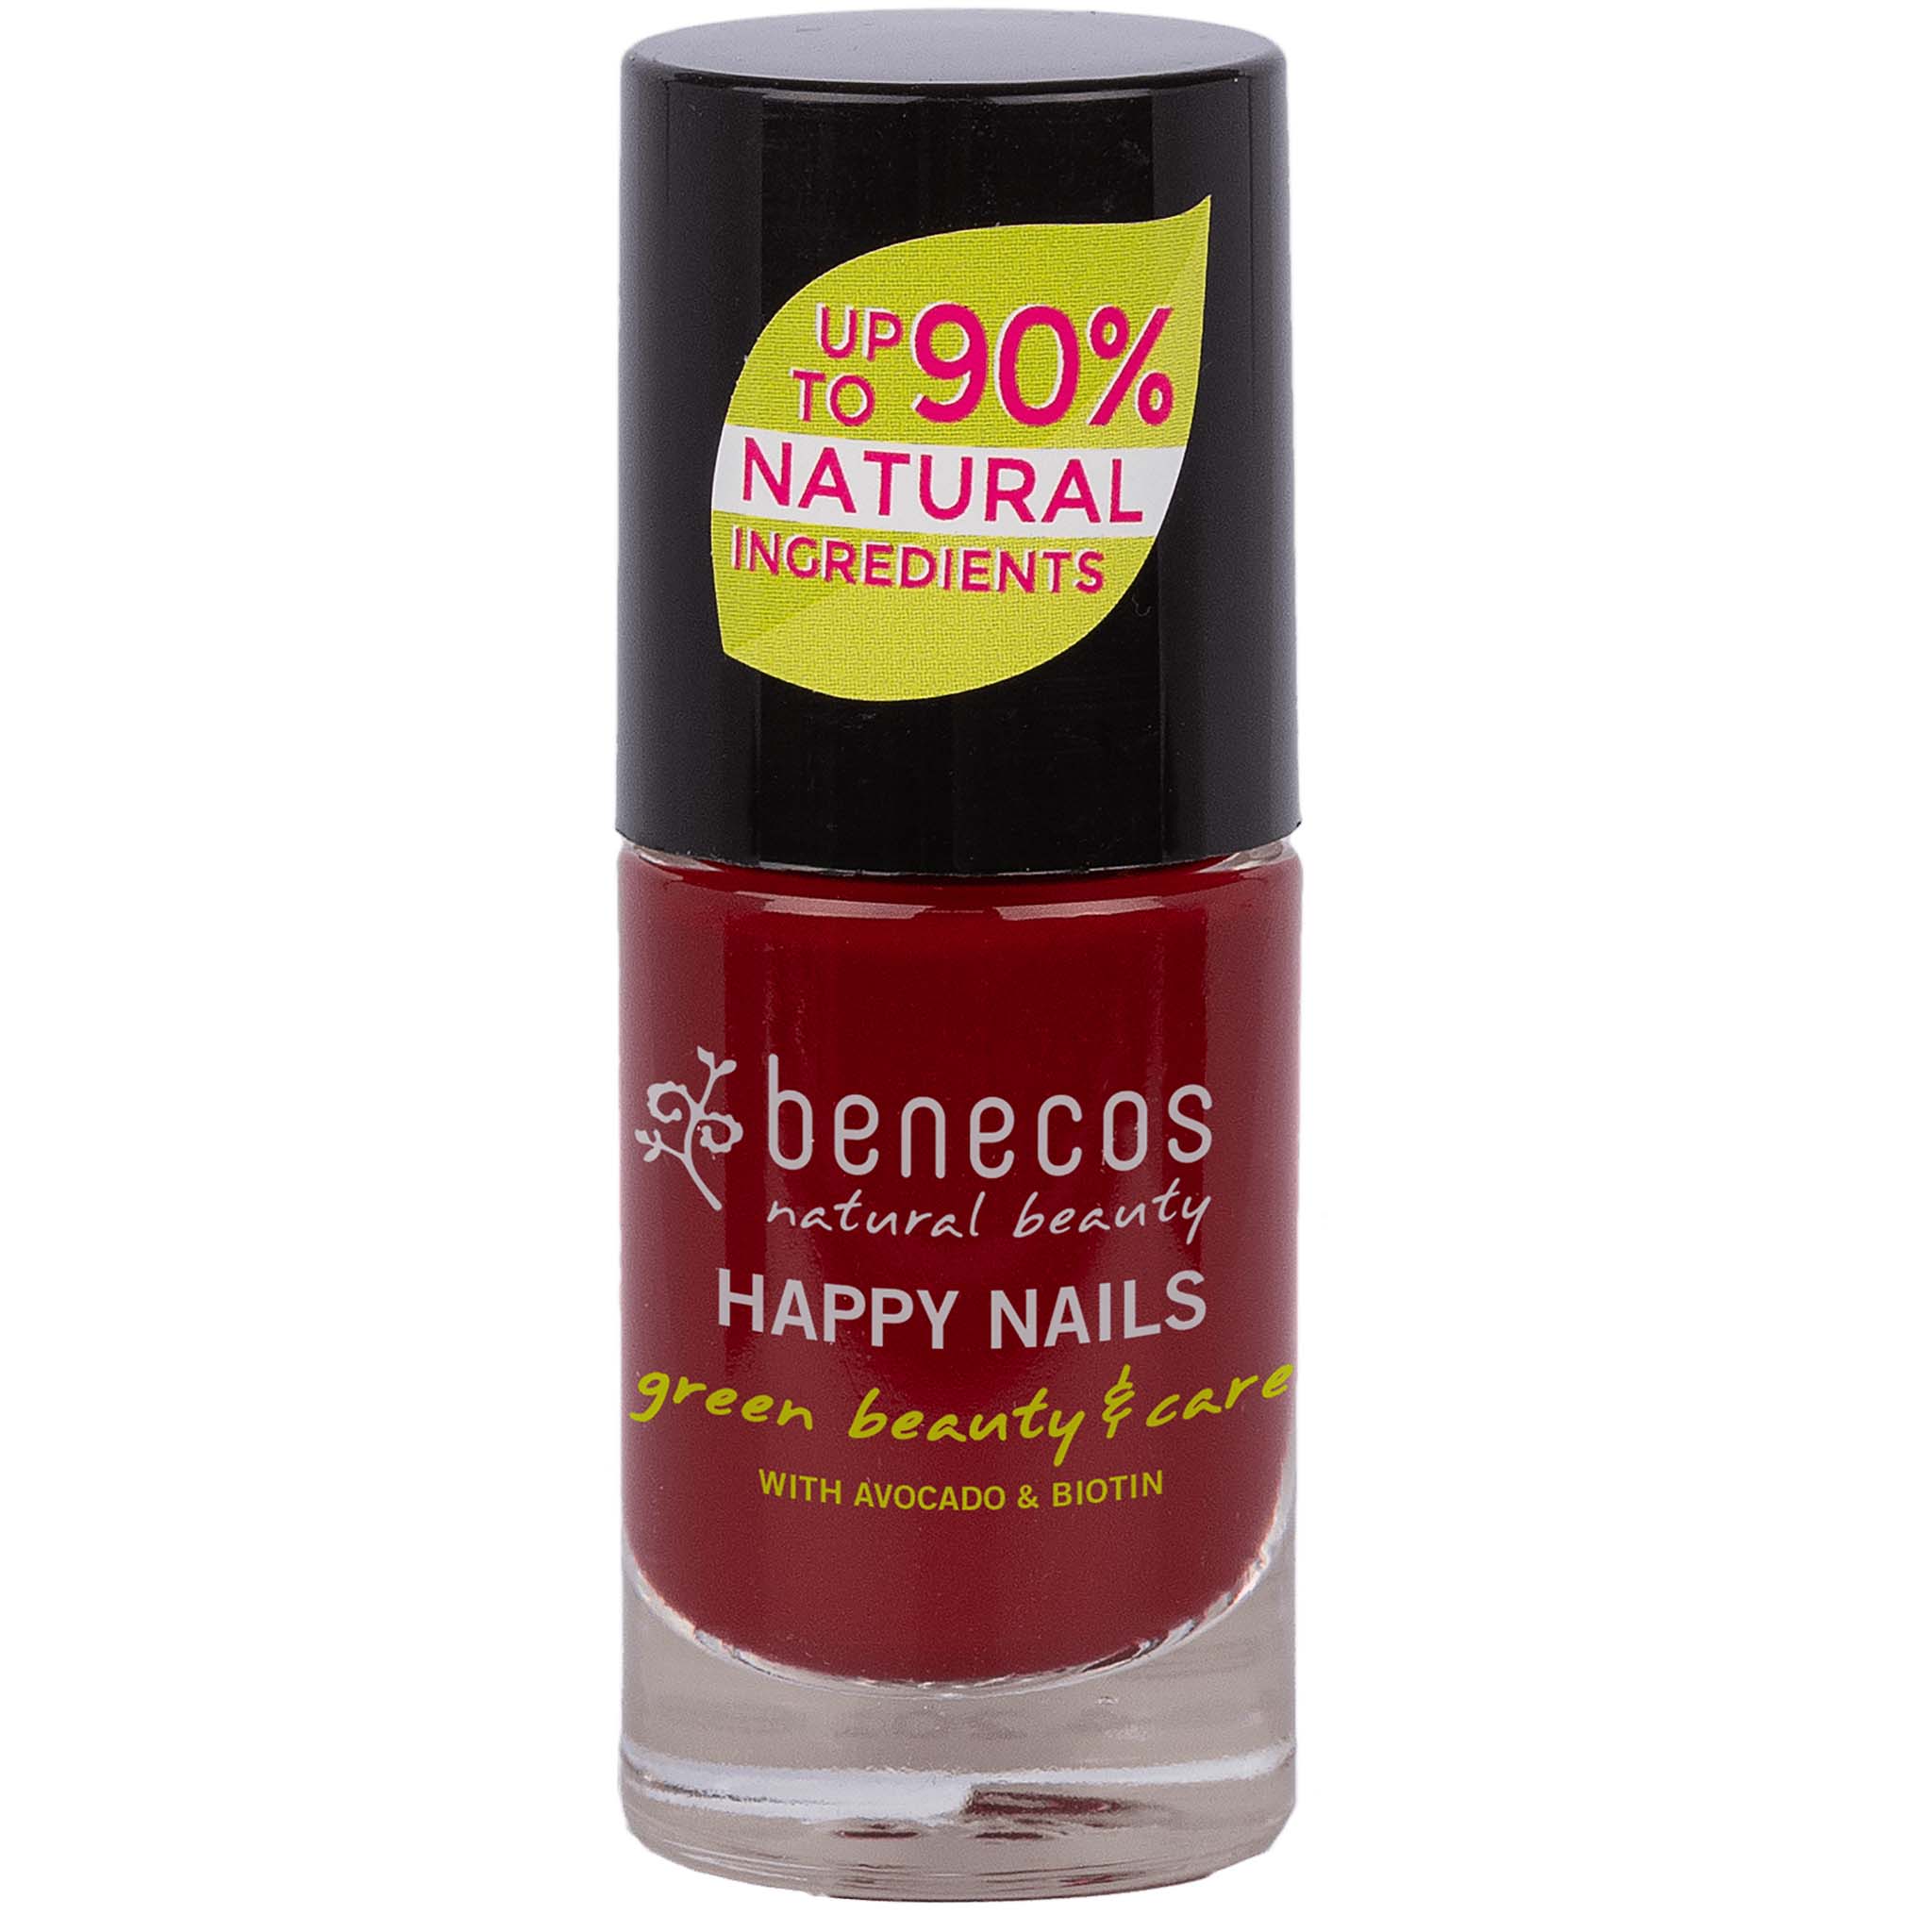 Natural Nail Polish - Cherry Red - UK DELIVERY ONLY - mypure.co.uk